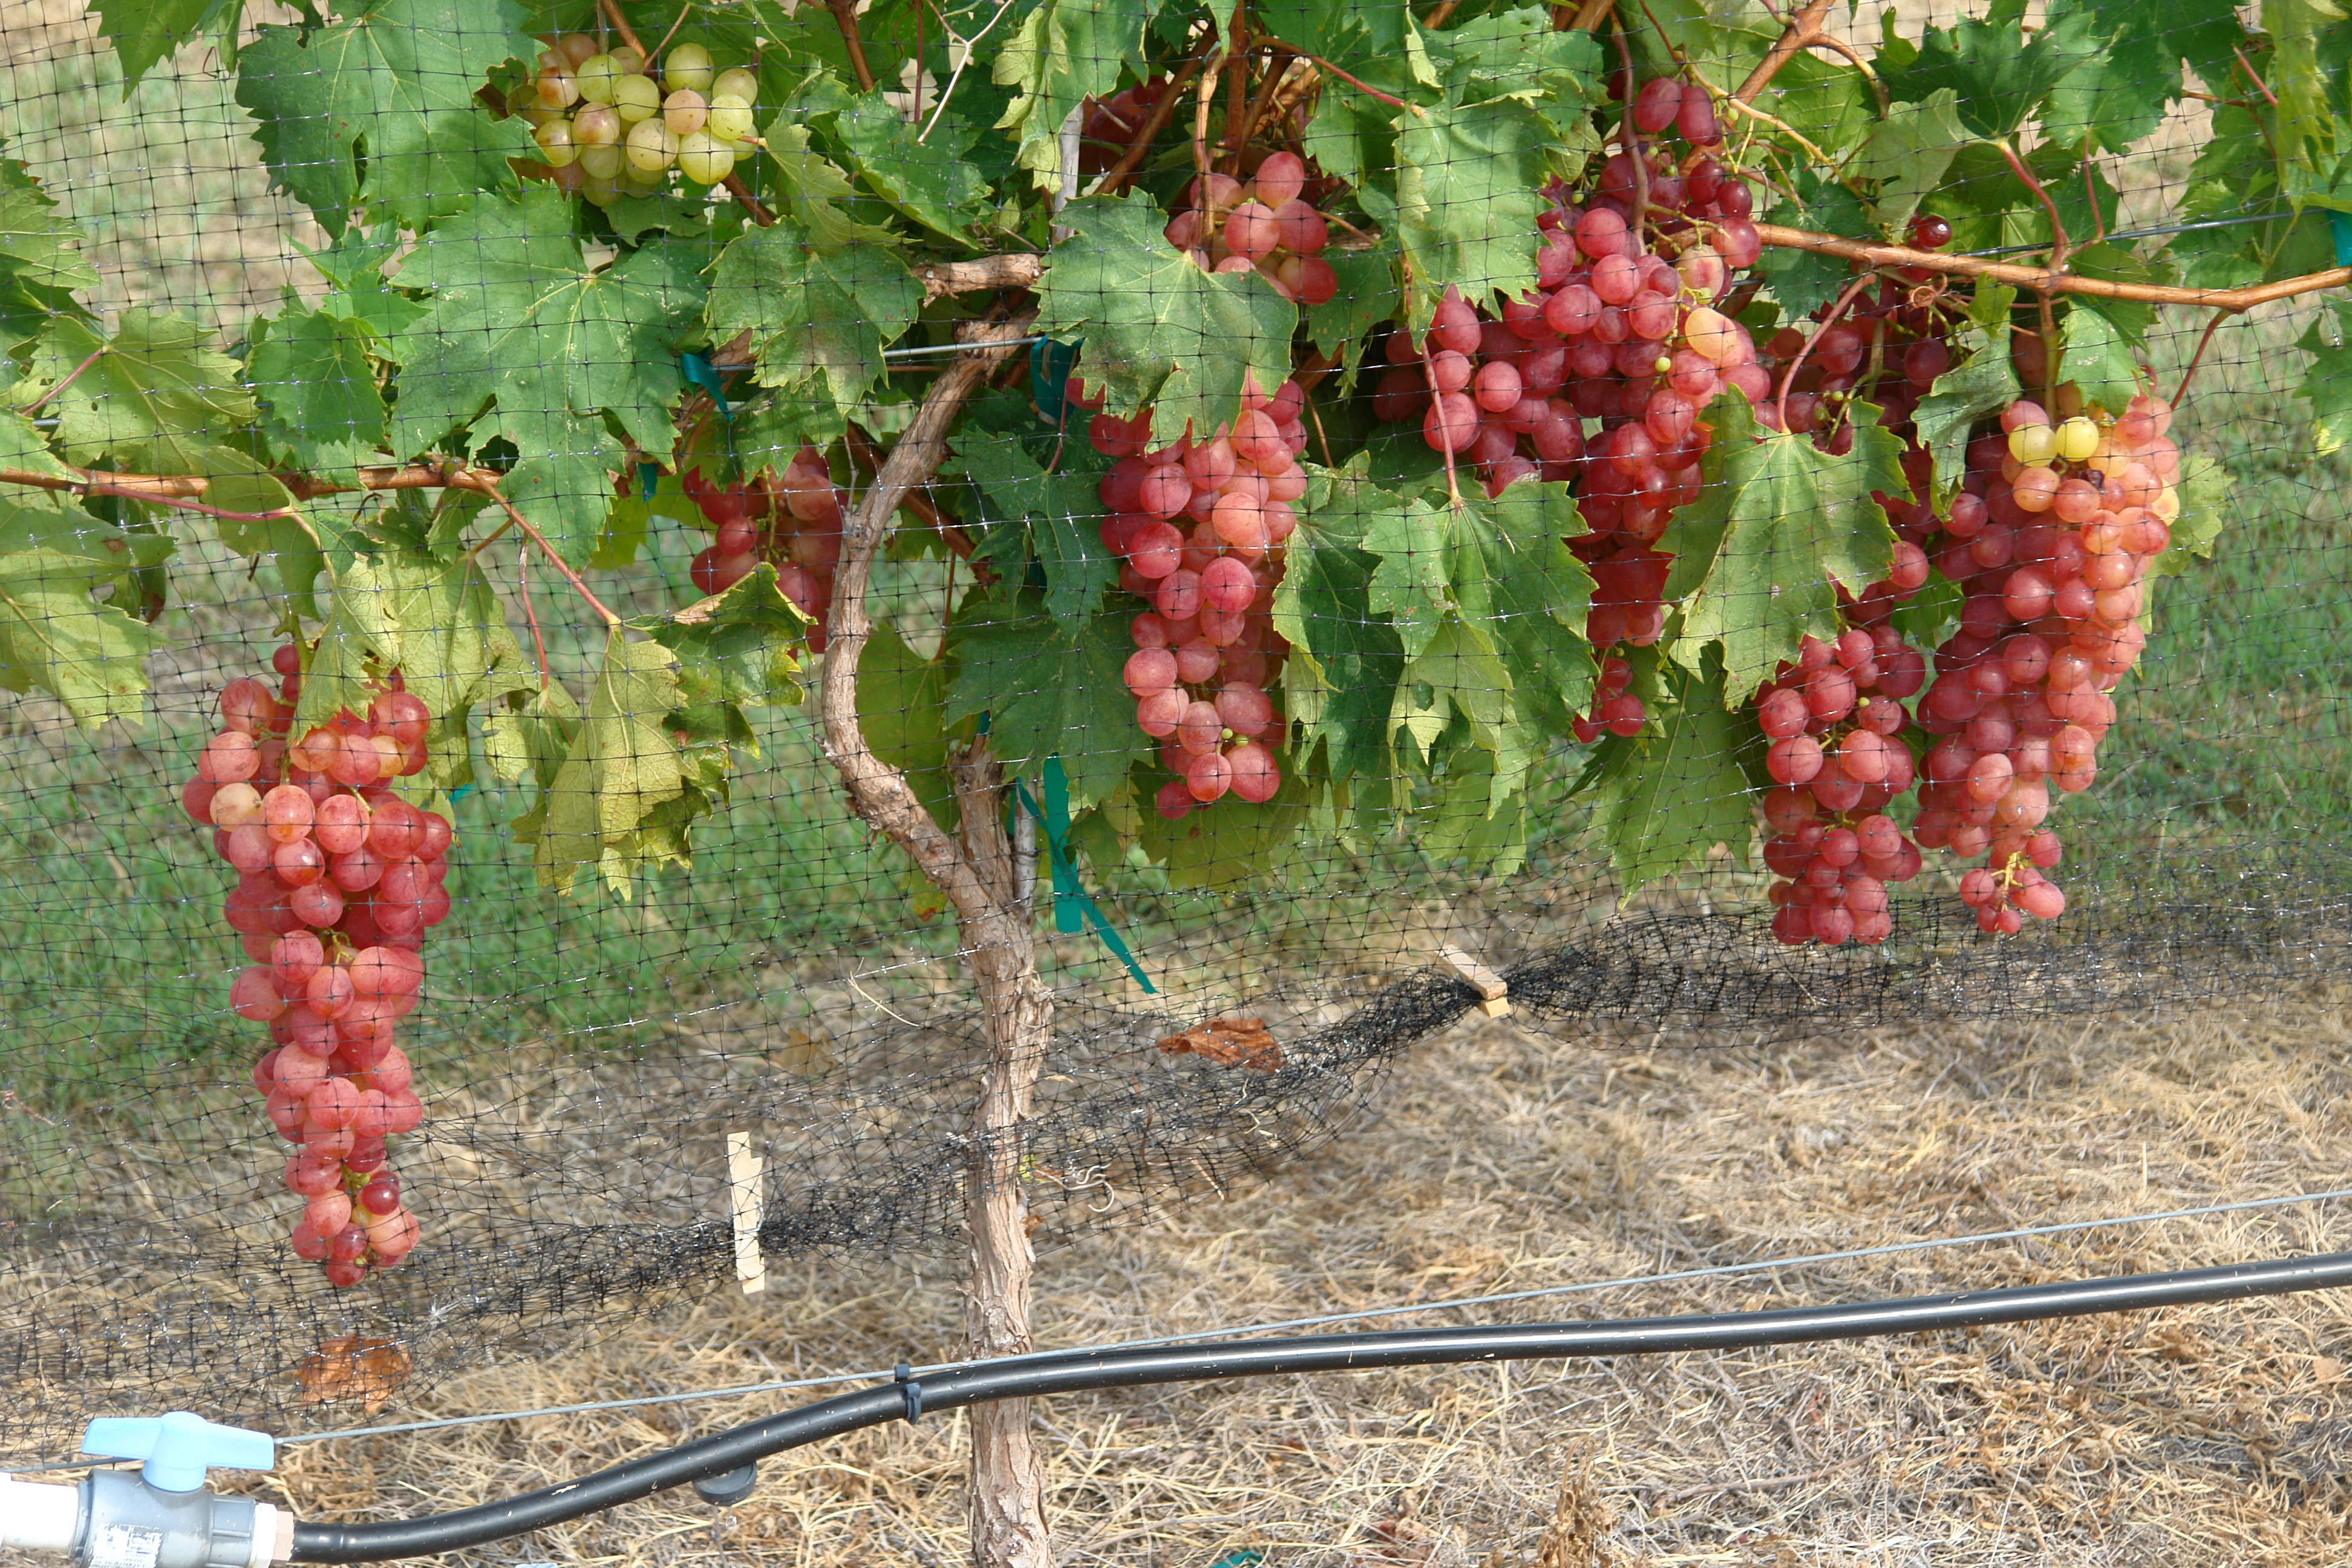 New Texas Superstar introduced: Victoria Red grapes - AgriLife Today